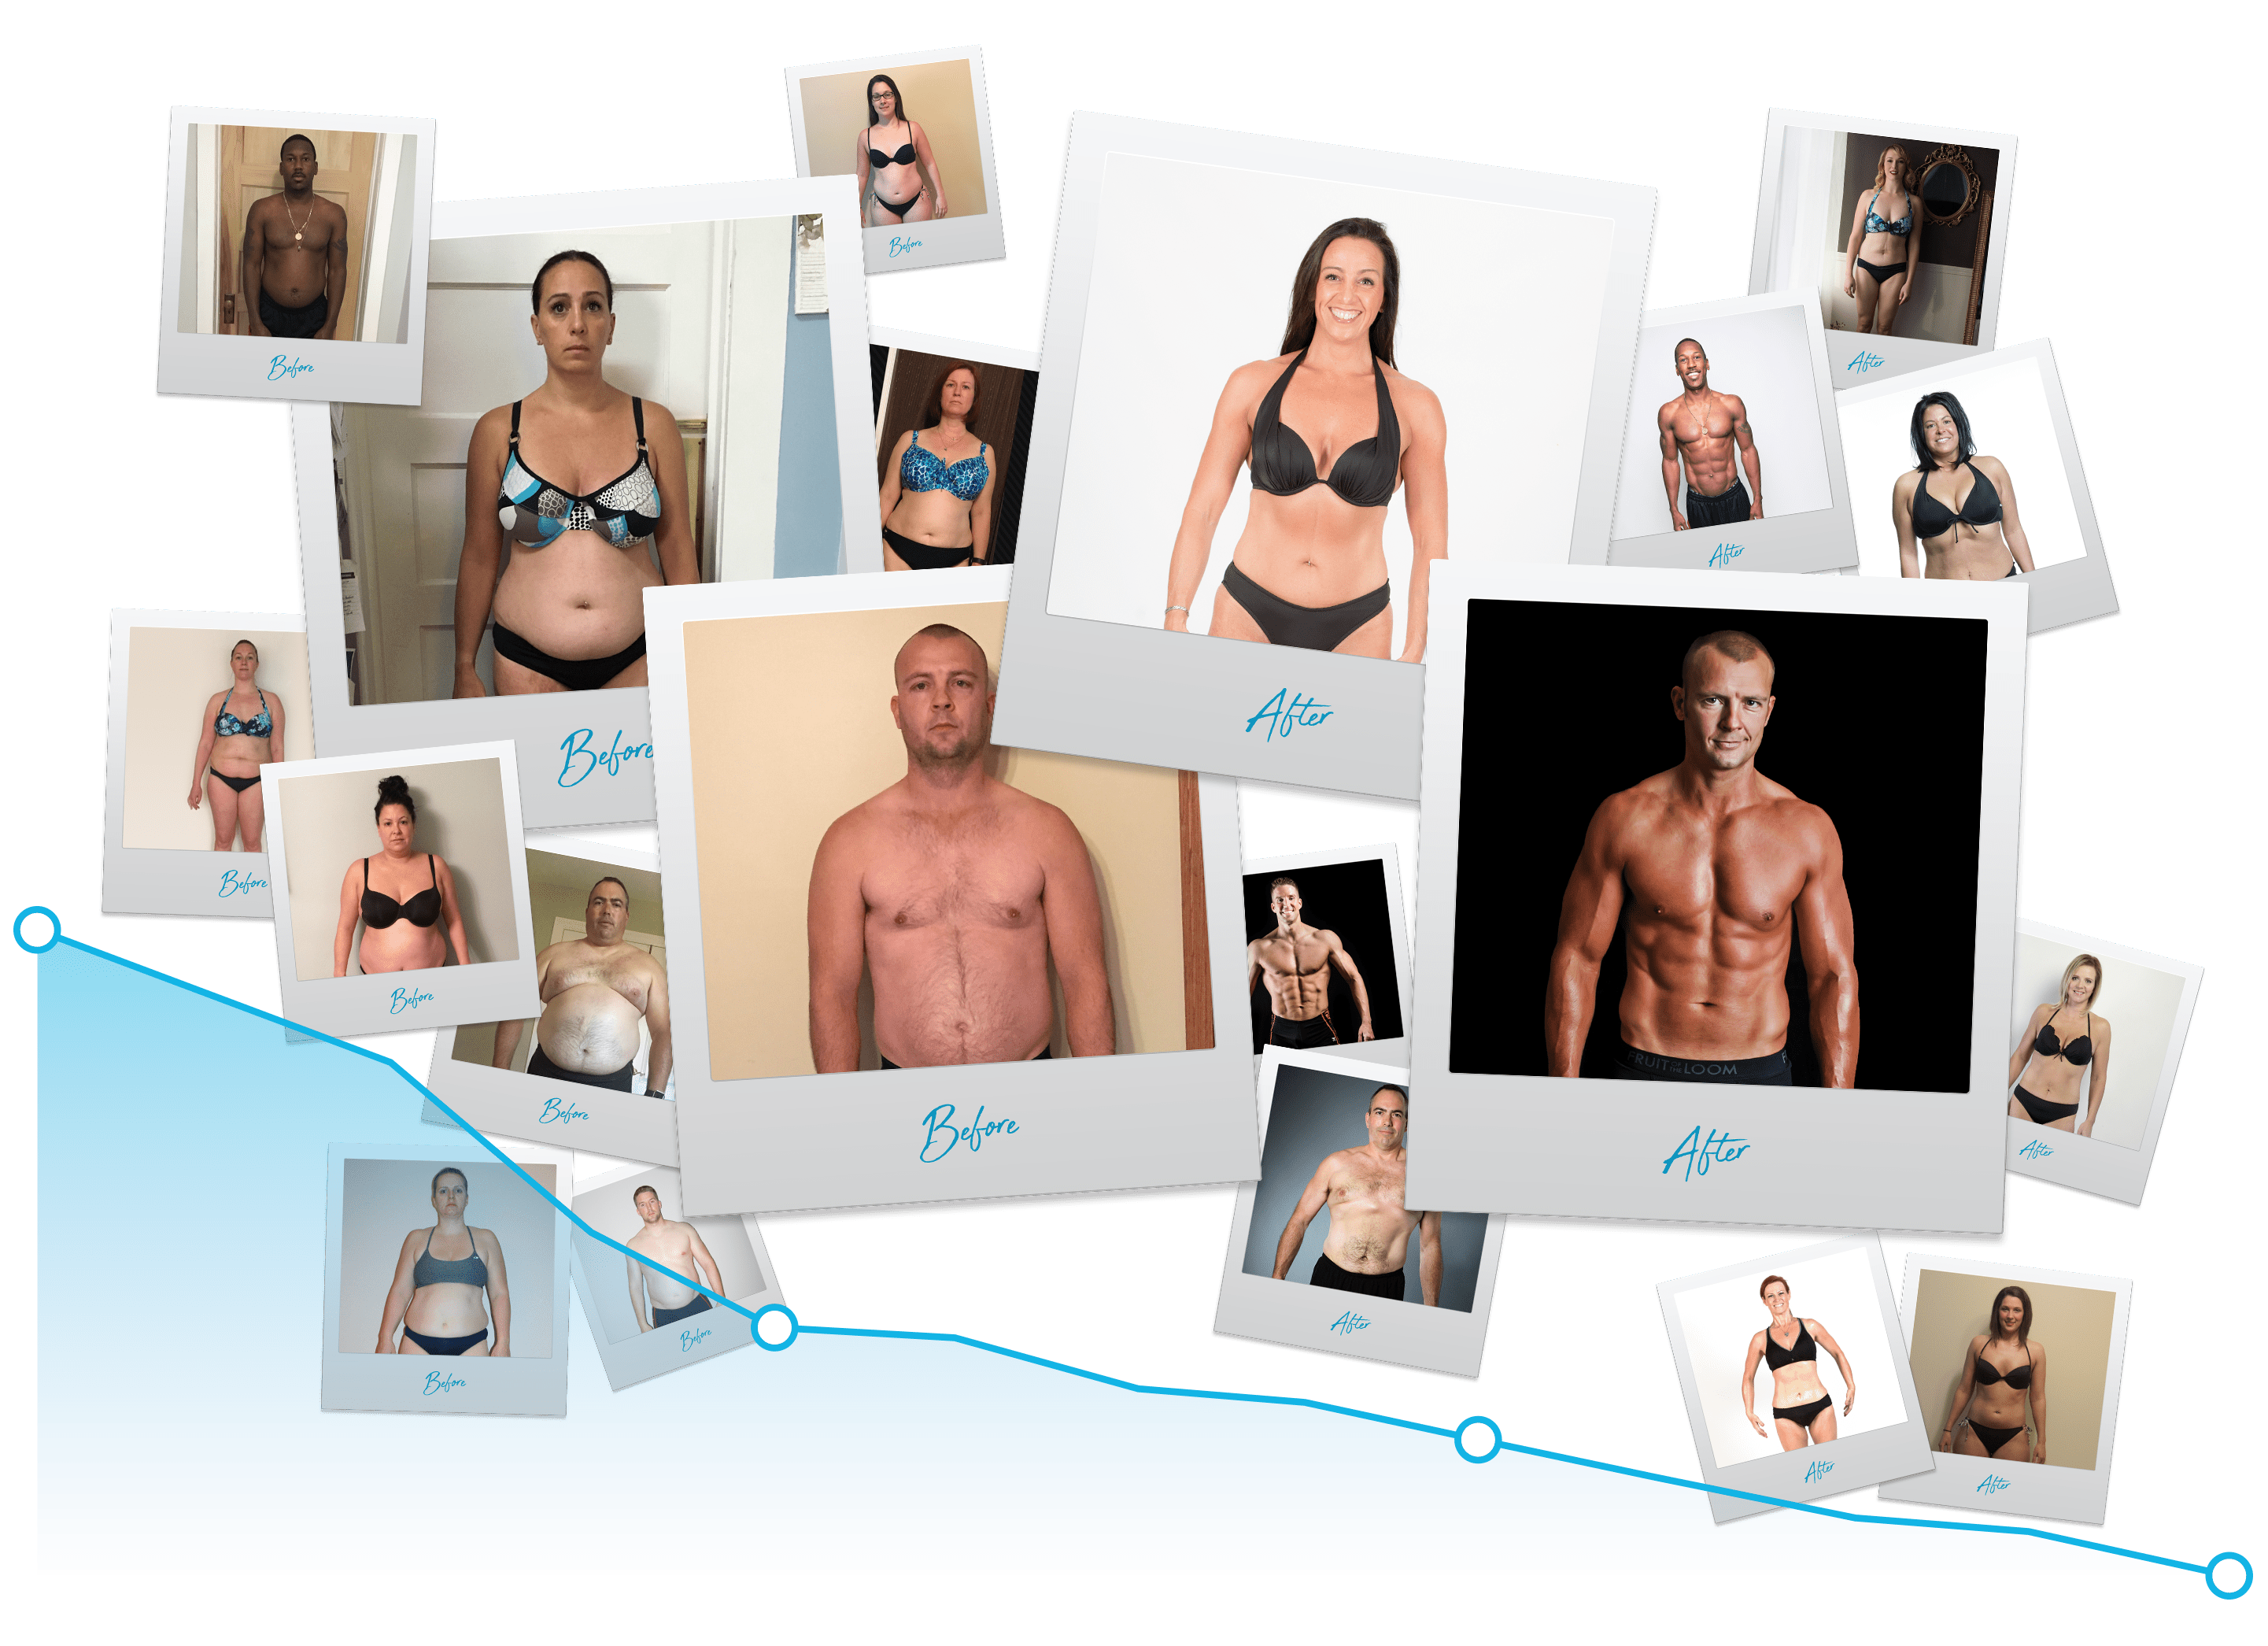 A collage of men and women before and after body transformation polaroid images.